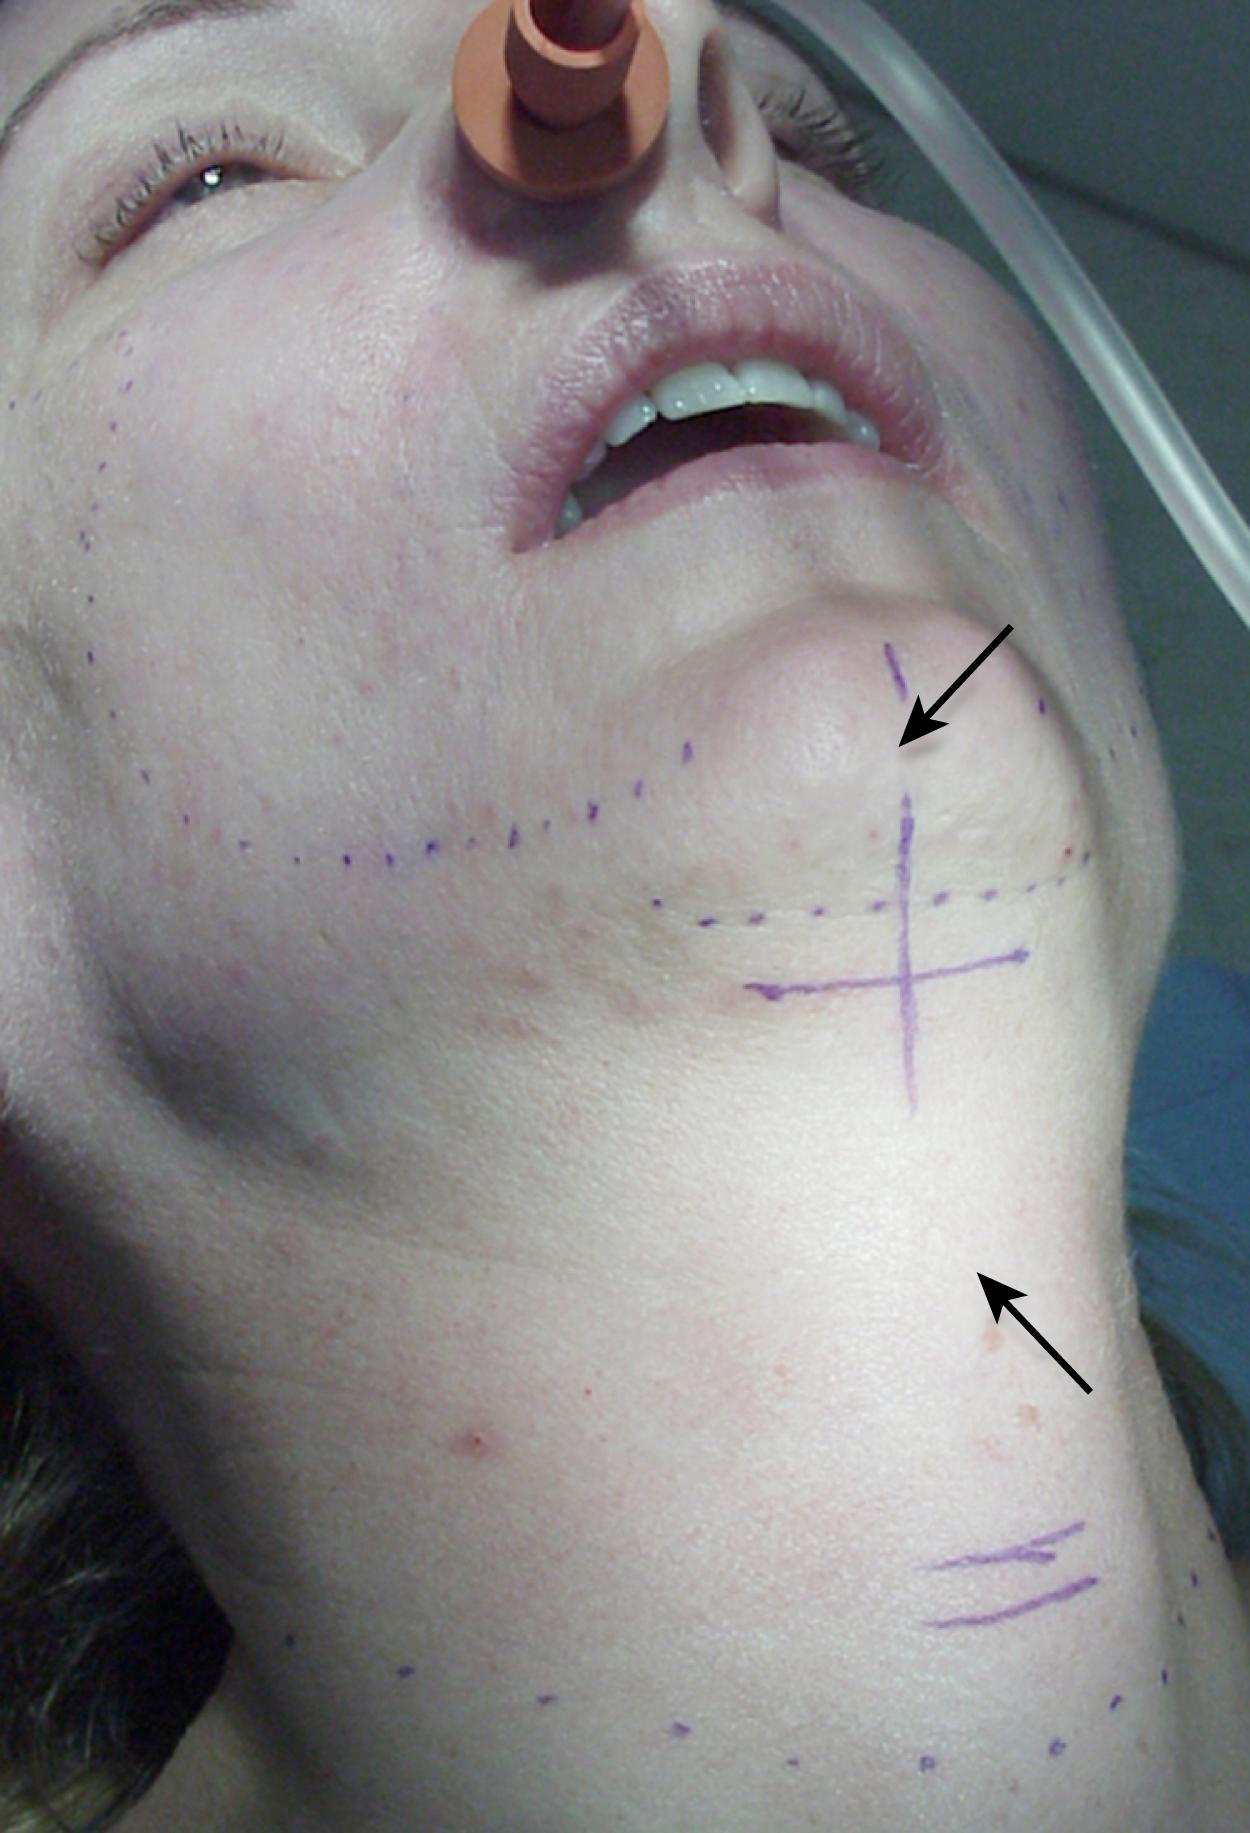 Fig. 67.16, Plan for the submental incision. The submental portion of the facelift incision ( solid line ) should be placed posterior to the submental crease ( dotted line ), approximately one-half the distance between the mentum and hyoid ( arrows ). Usually this corresponds to a point about 1.5 cm posterior to the submental crease.